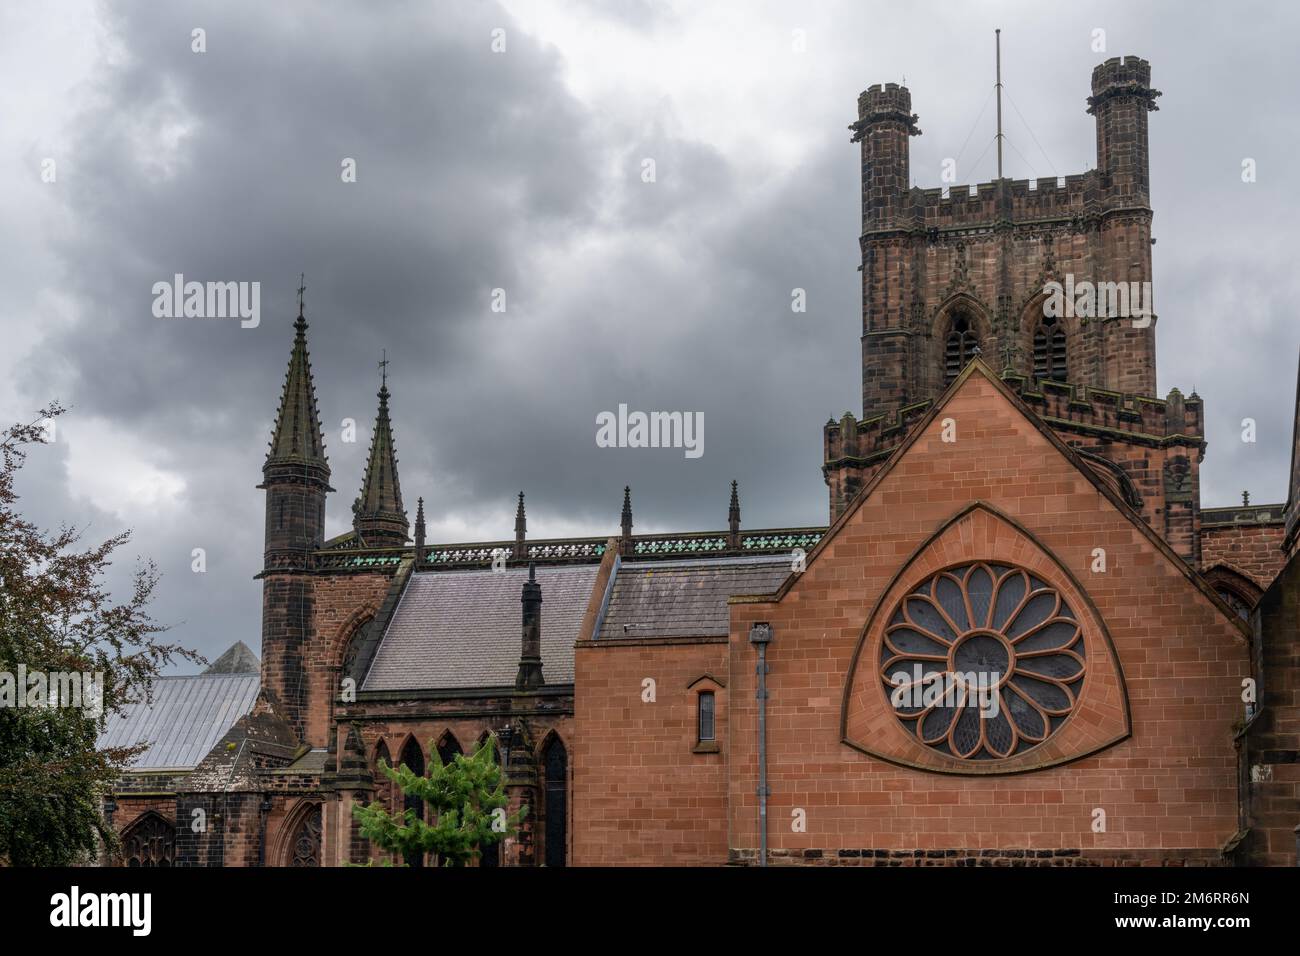 Architectural detail of the historic Chester Cathedral in Cheshire under an overcast sky Stock Photo